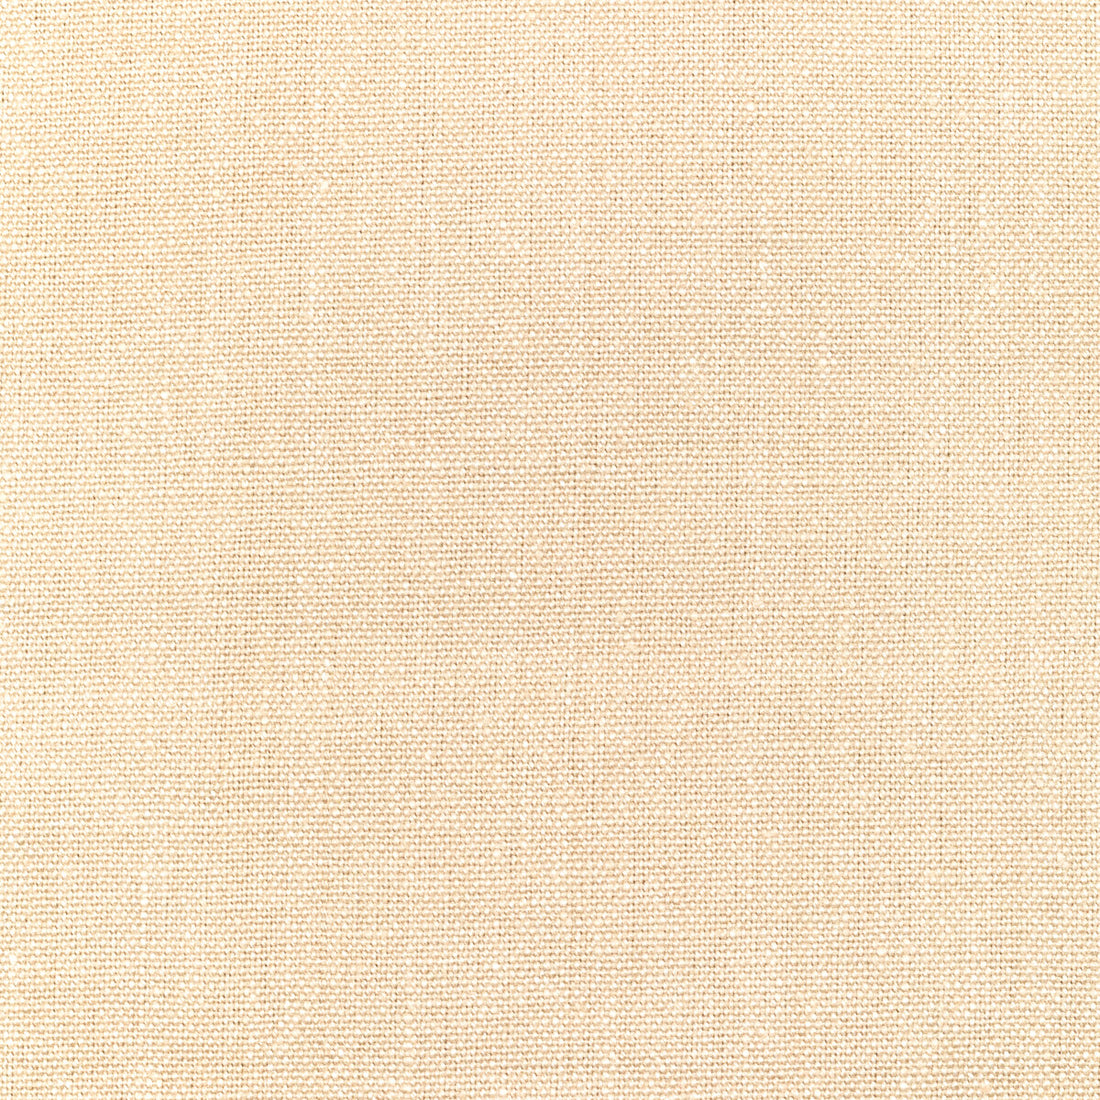 Watermill Linen fabric in natural color - pattern 2012176.111.0 - by Lee Jofa in the Colour Complements II collection